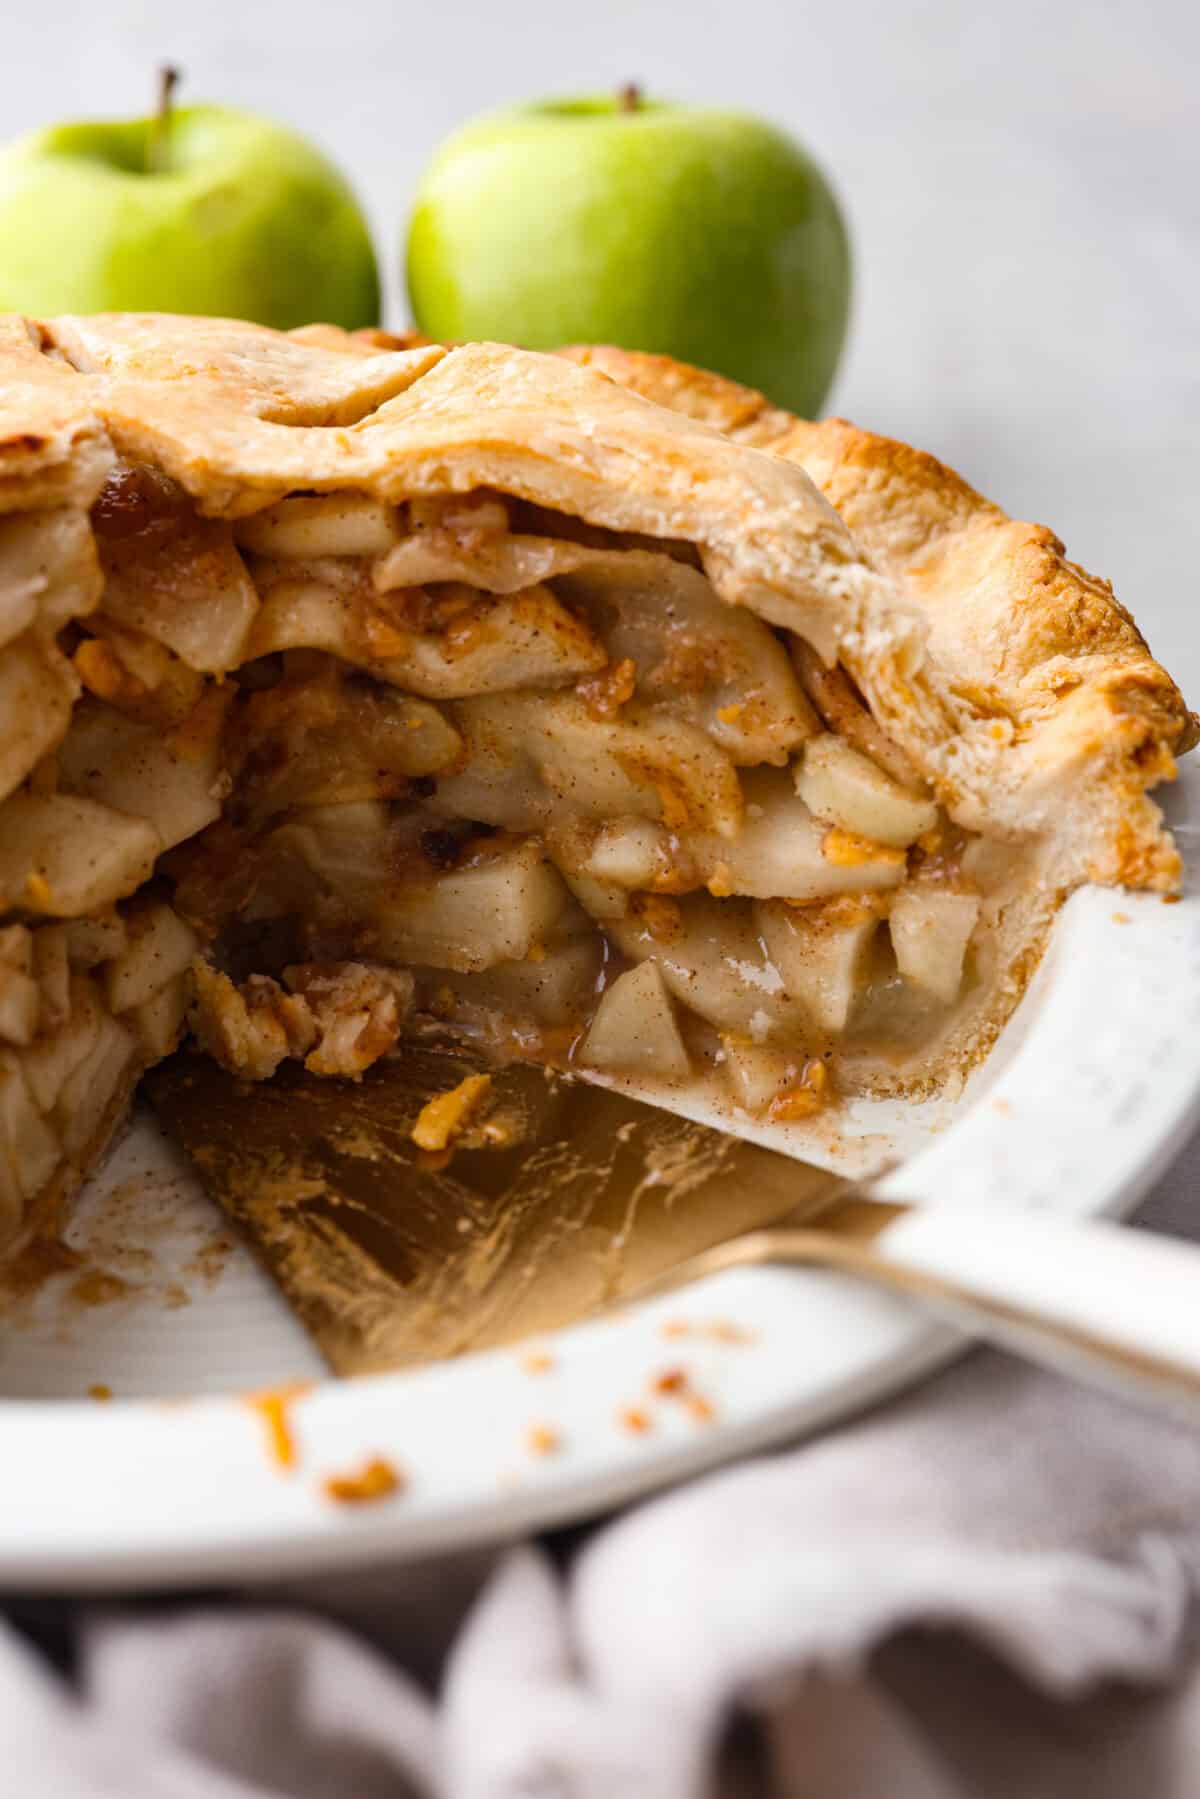 a pie with a slice taken out so that you can see all of the inside with the apple slices. 